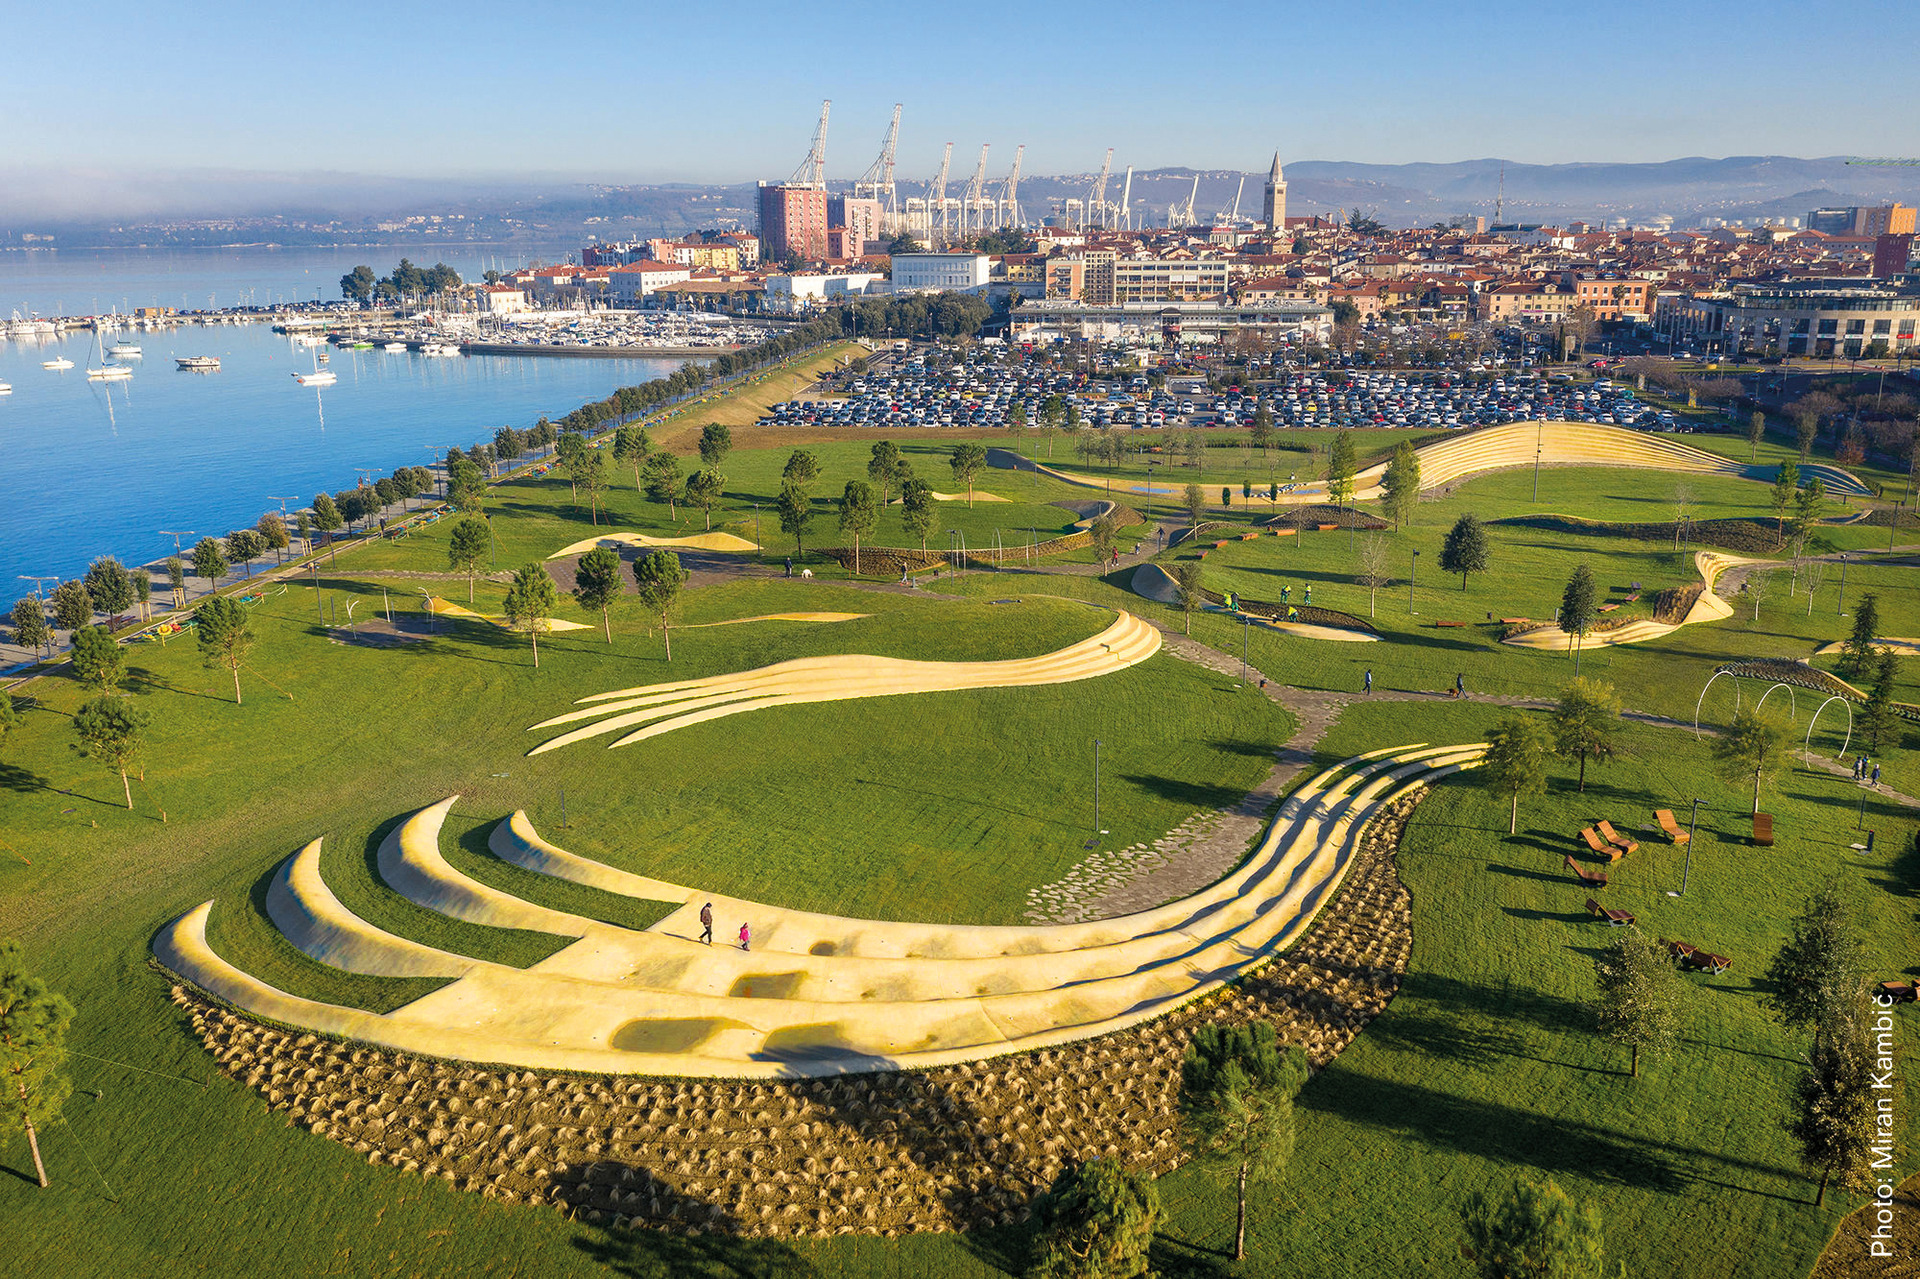 Koper Park - made of concrete colored with Bayferrox pigments